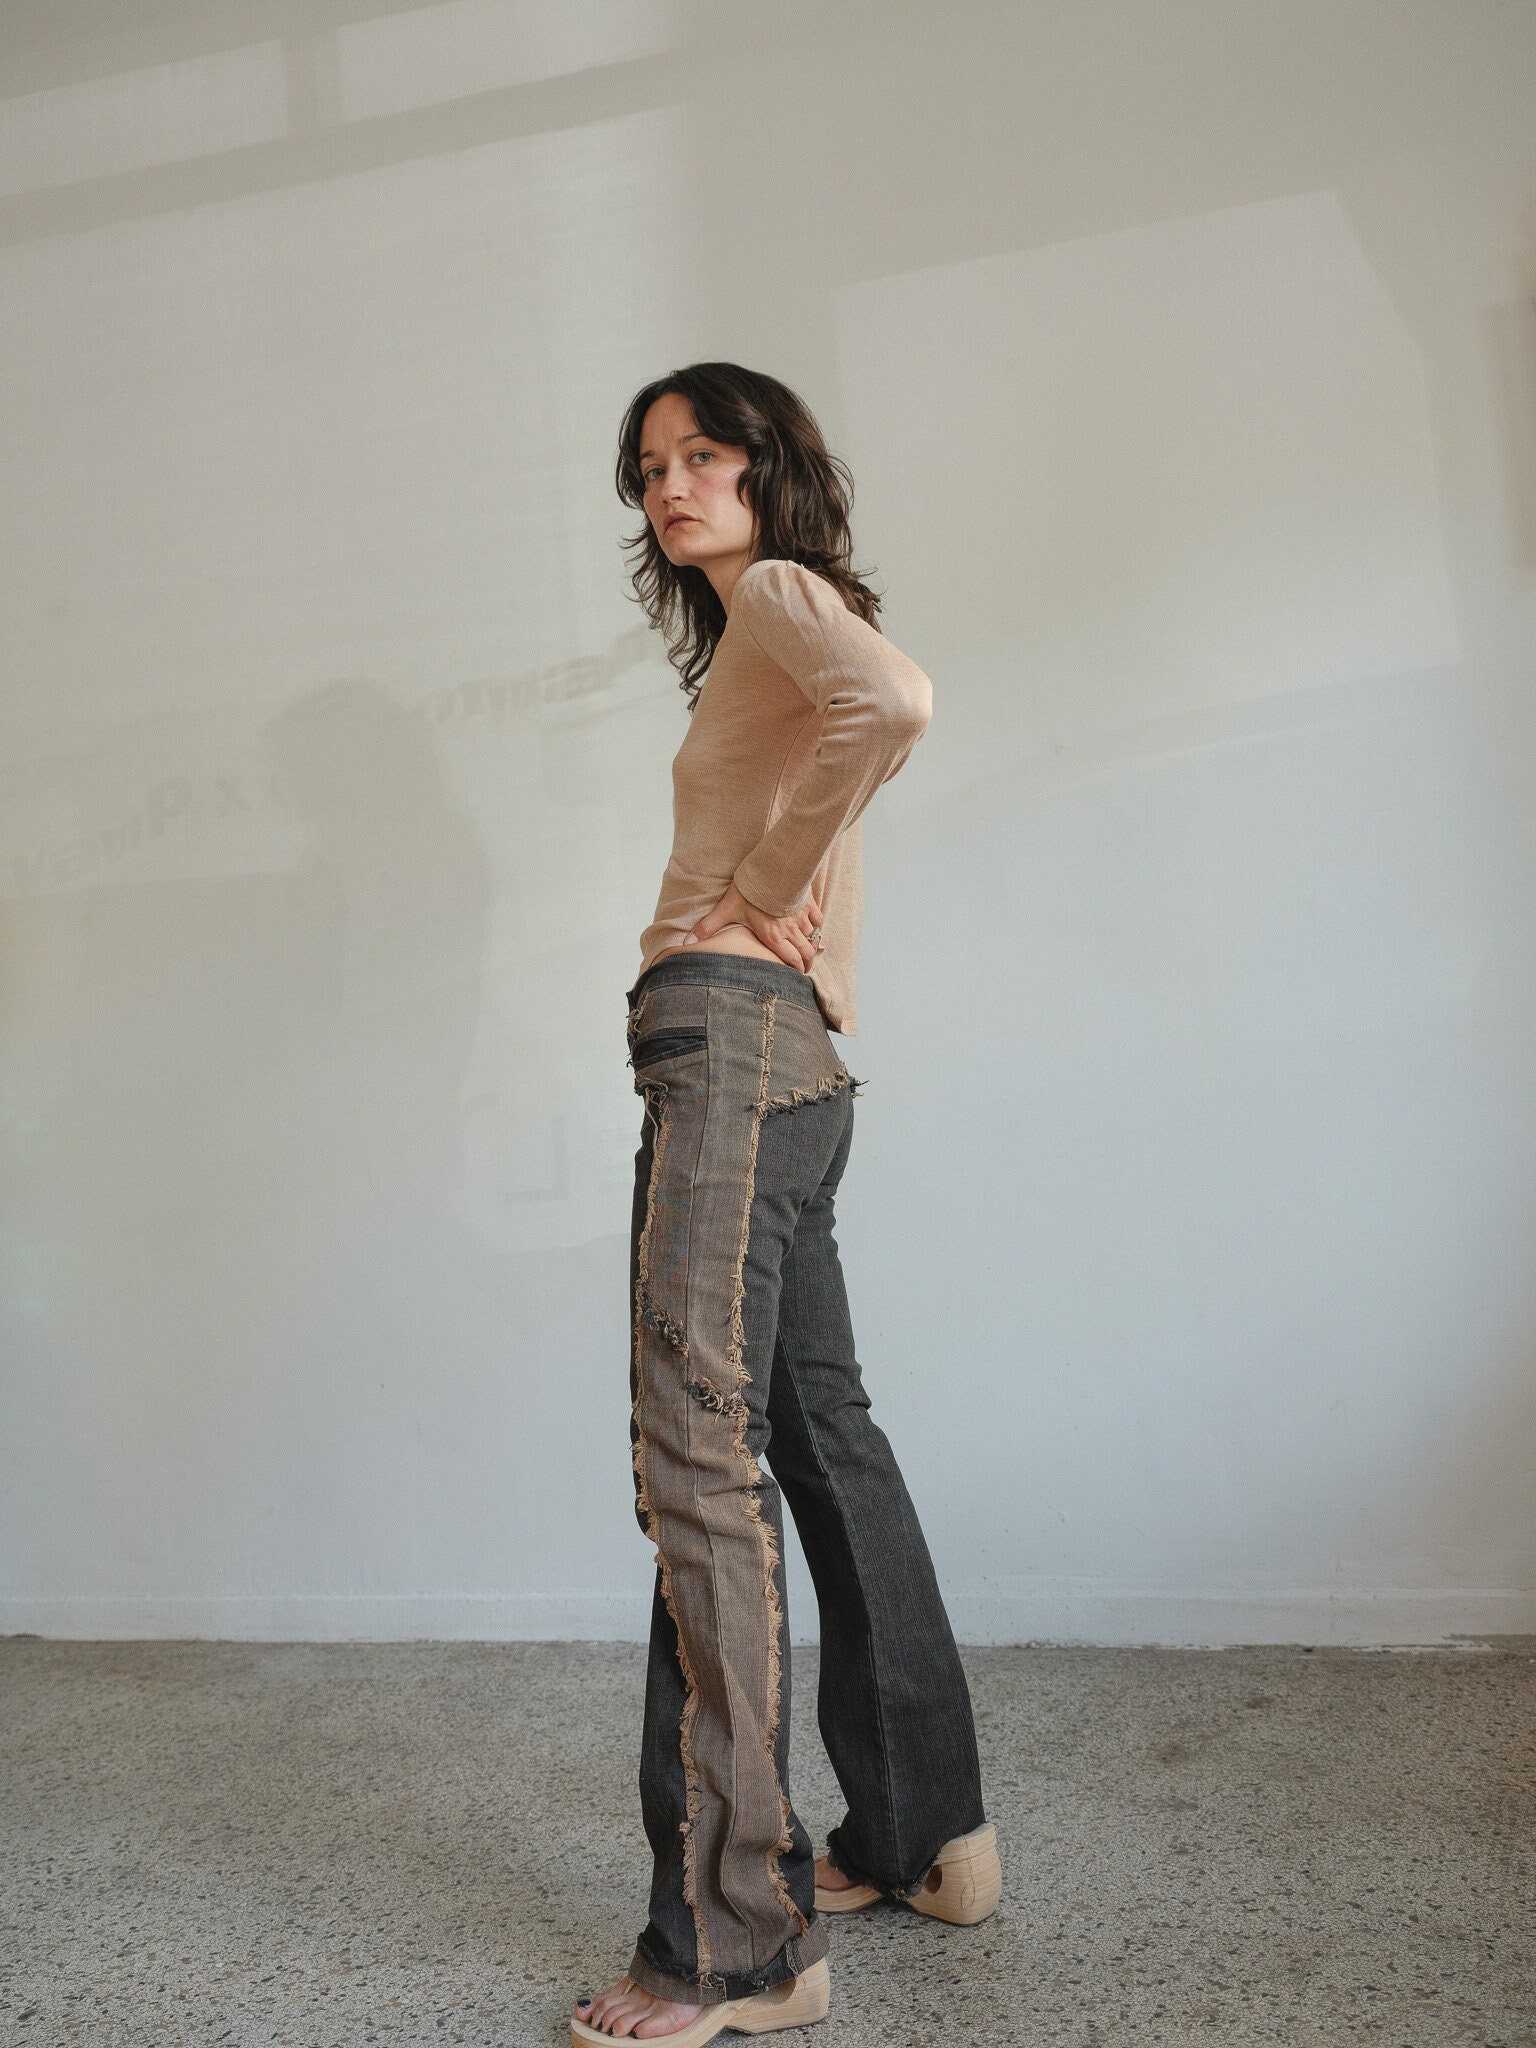 Women's Flare Pants: 200+ Items up to −90%